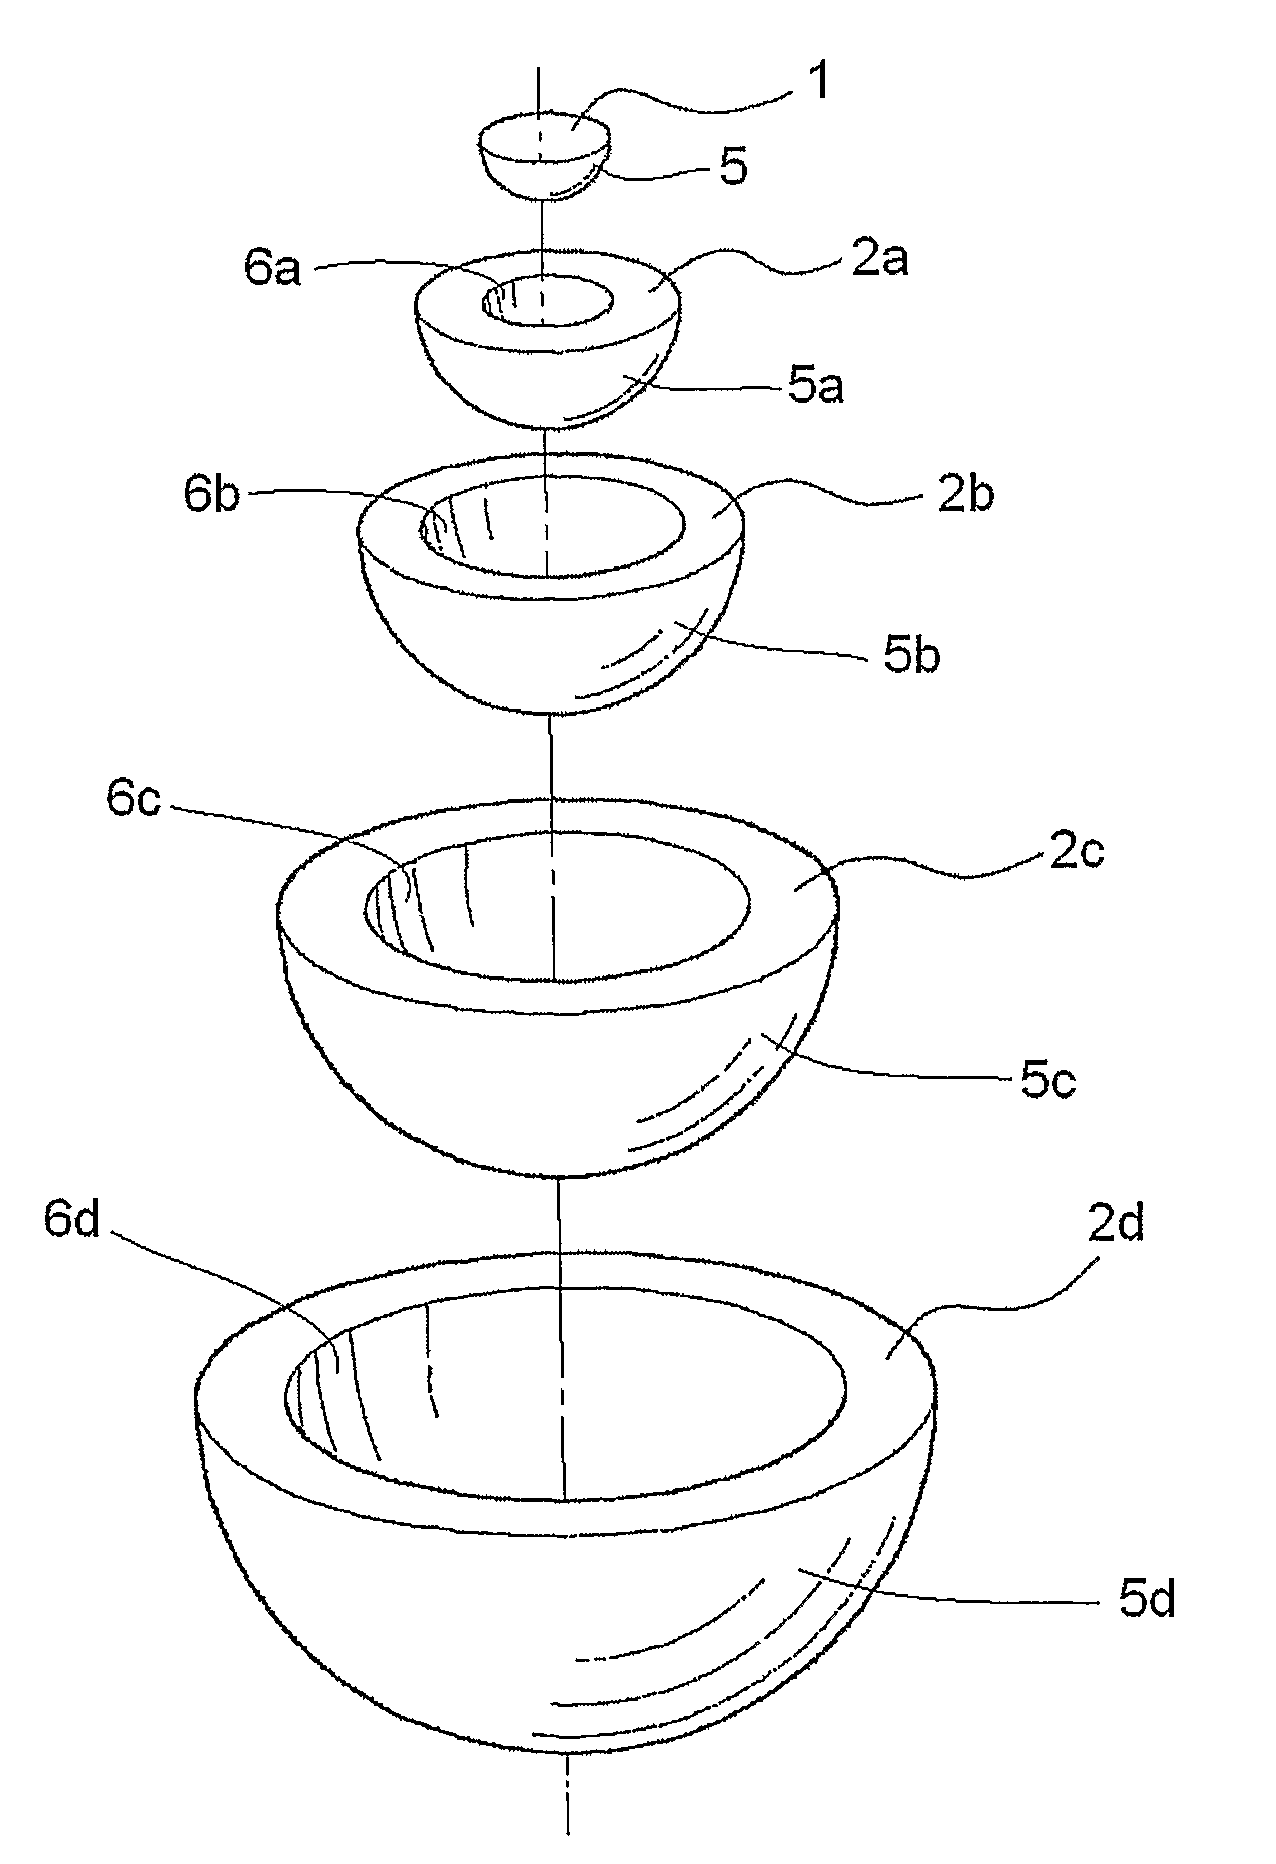 Luneberg dielectric lens and method of producing same